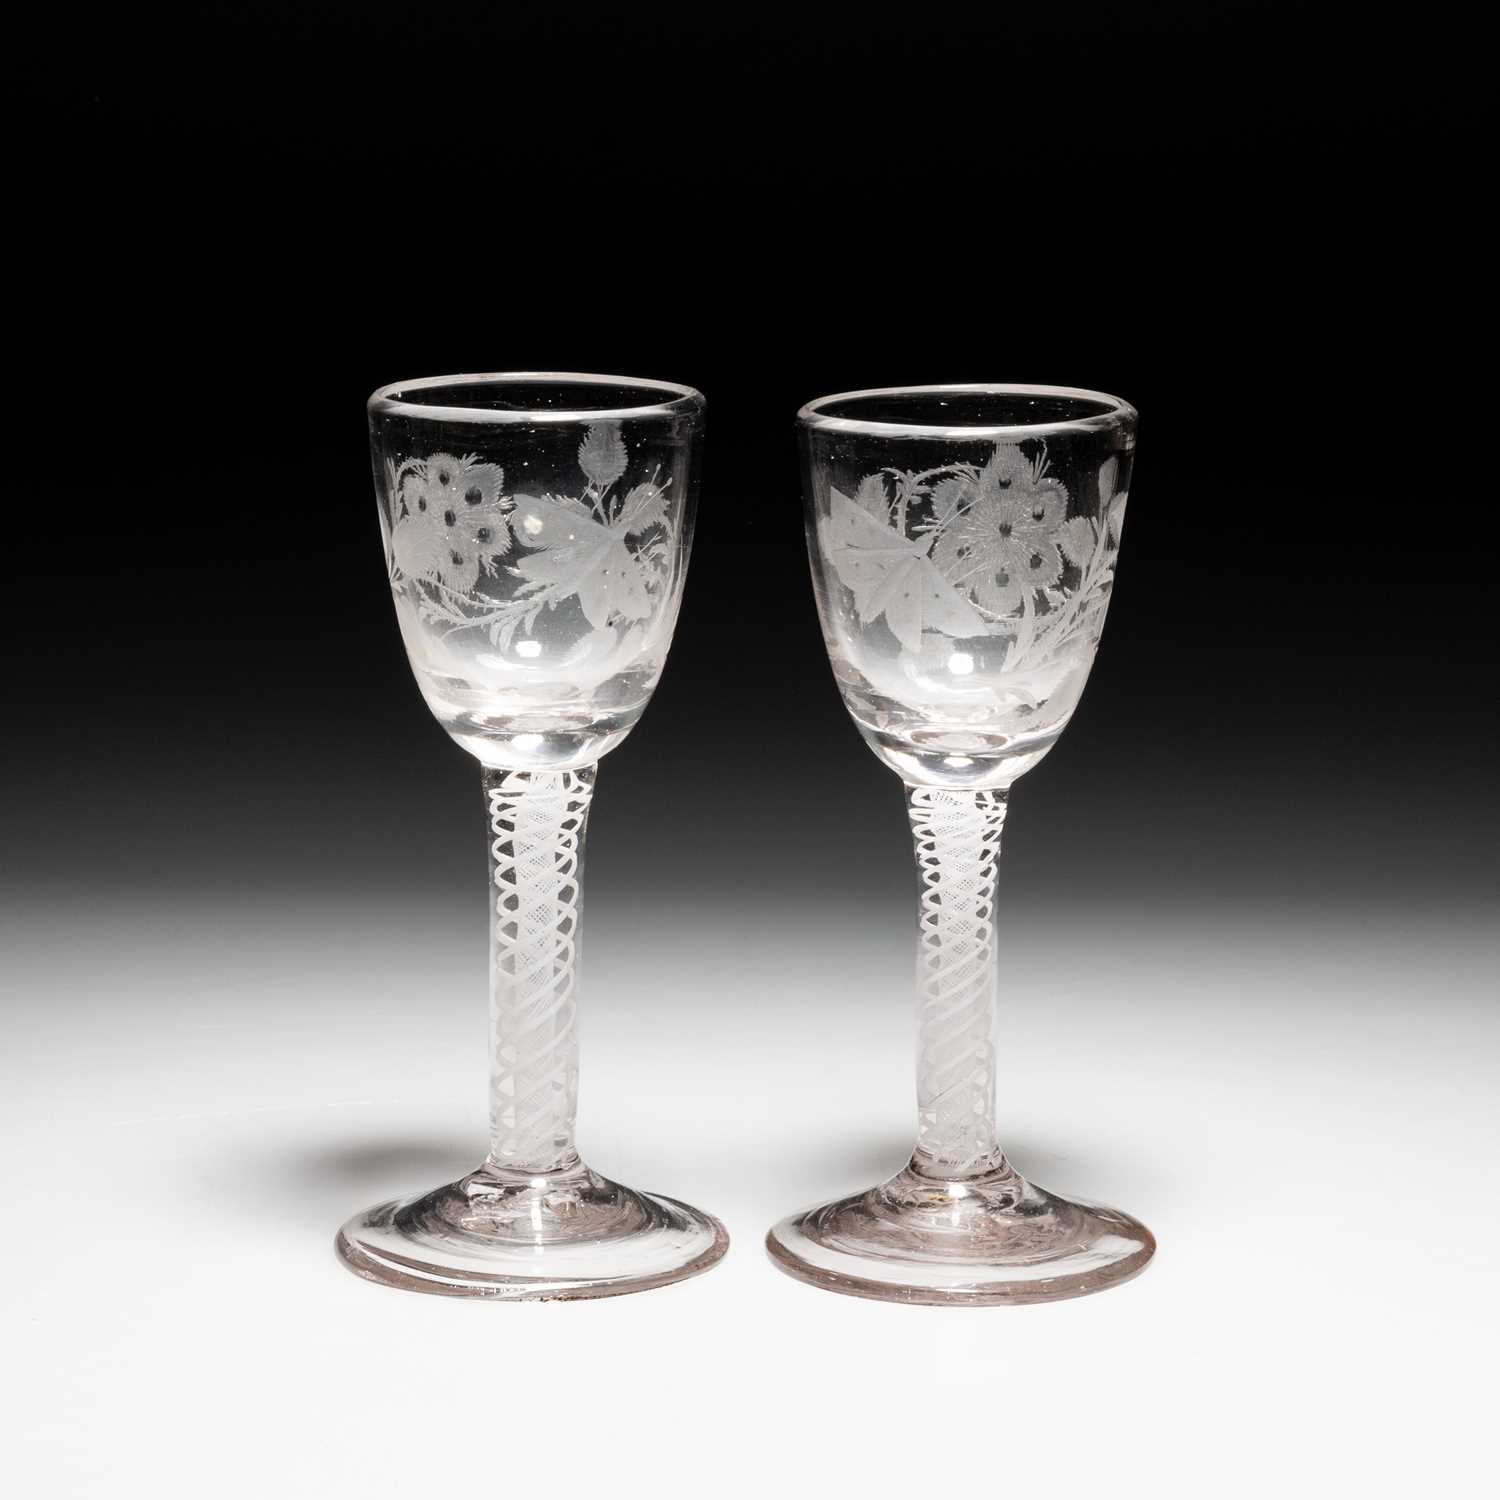 A PAIR OF 18TH CENTURY 'JACOBITE' WINE GLASSES, CIRCA 1770 - Image 2 of 8